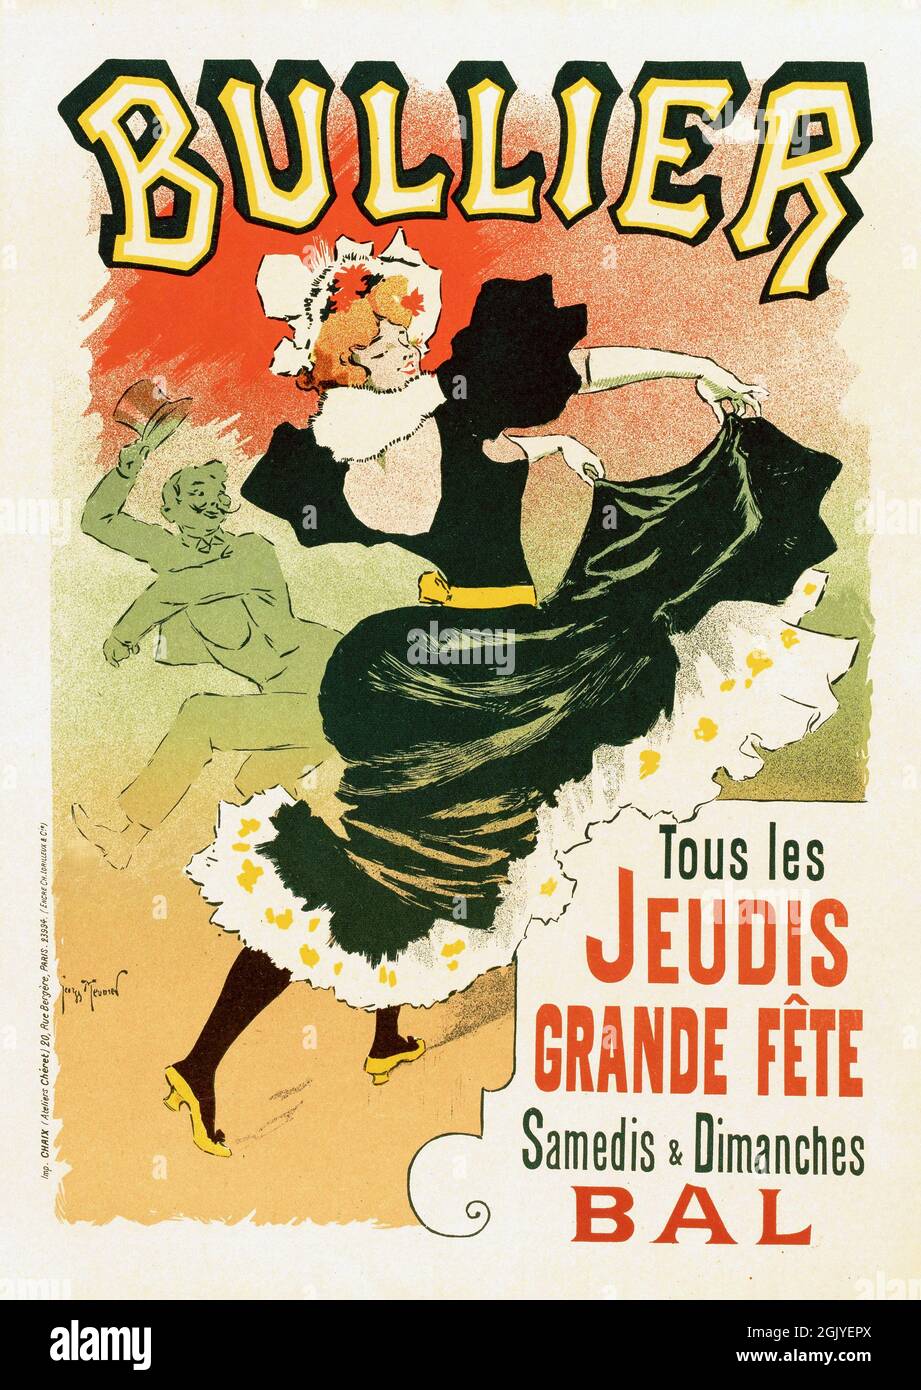 Vintage Poster advertising thursday parties and weekend balls at Bullier, tous les jeudis grand fetes dans Bullier by Georges Meunier, 1895. Stock Photo